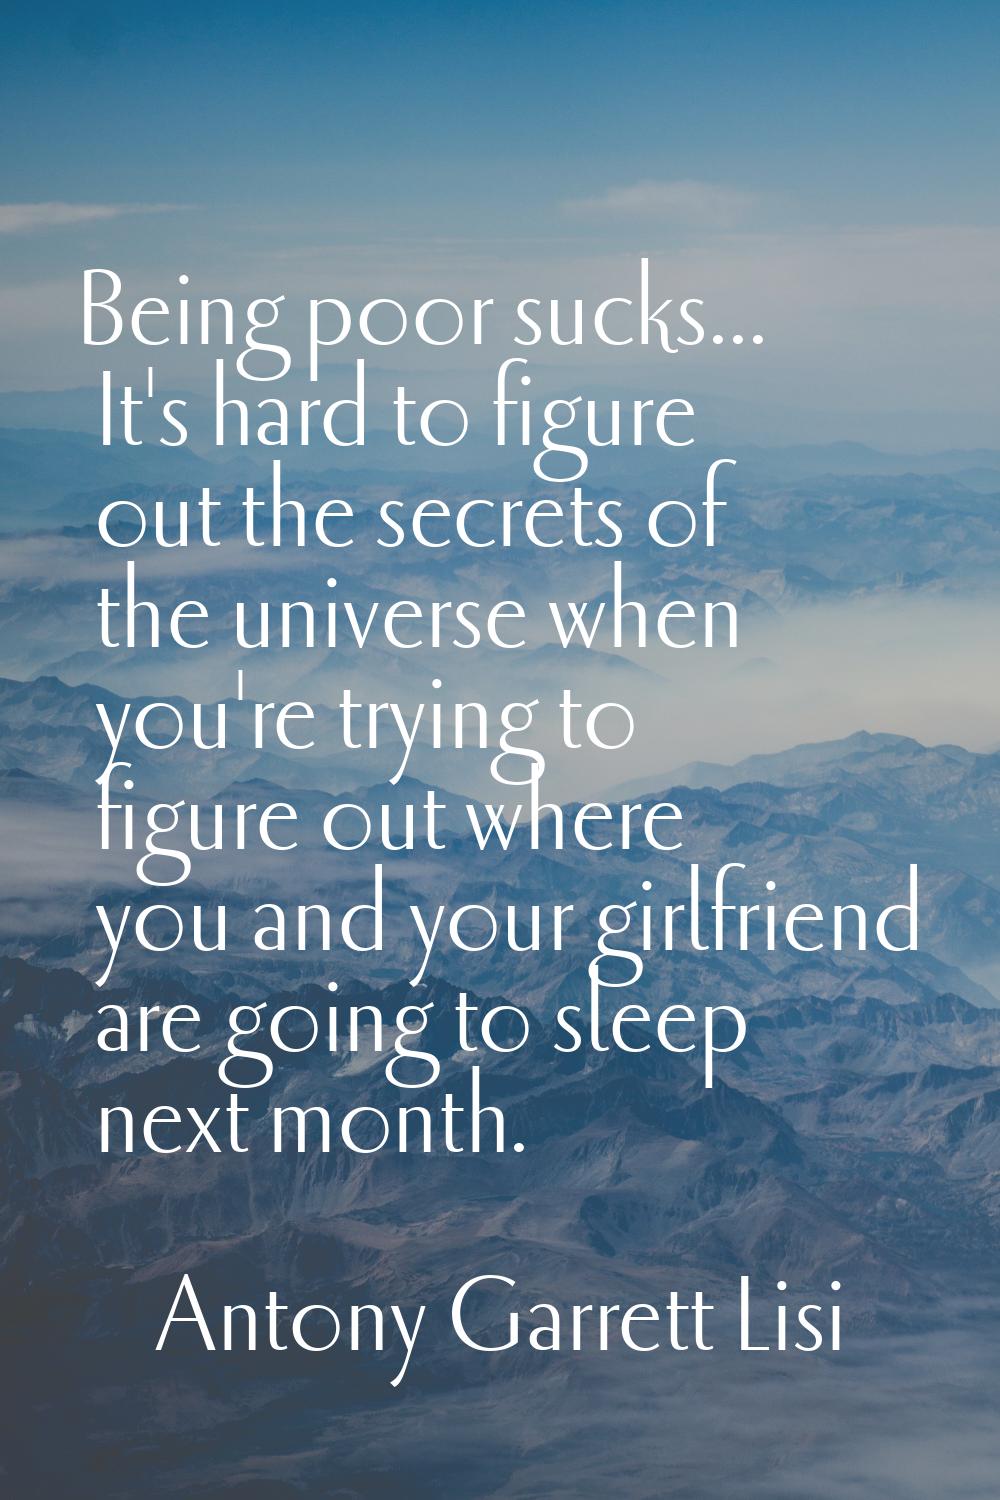 Being poor sucks... It's hard to figure out the secrets of the universe when you're trying to figur